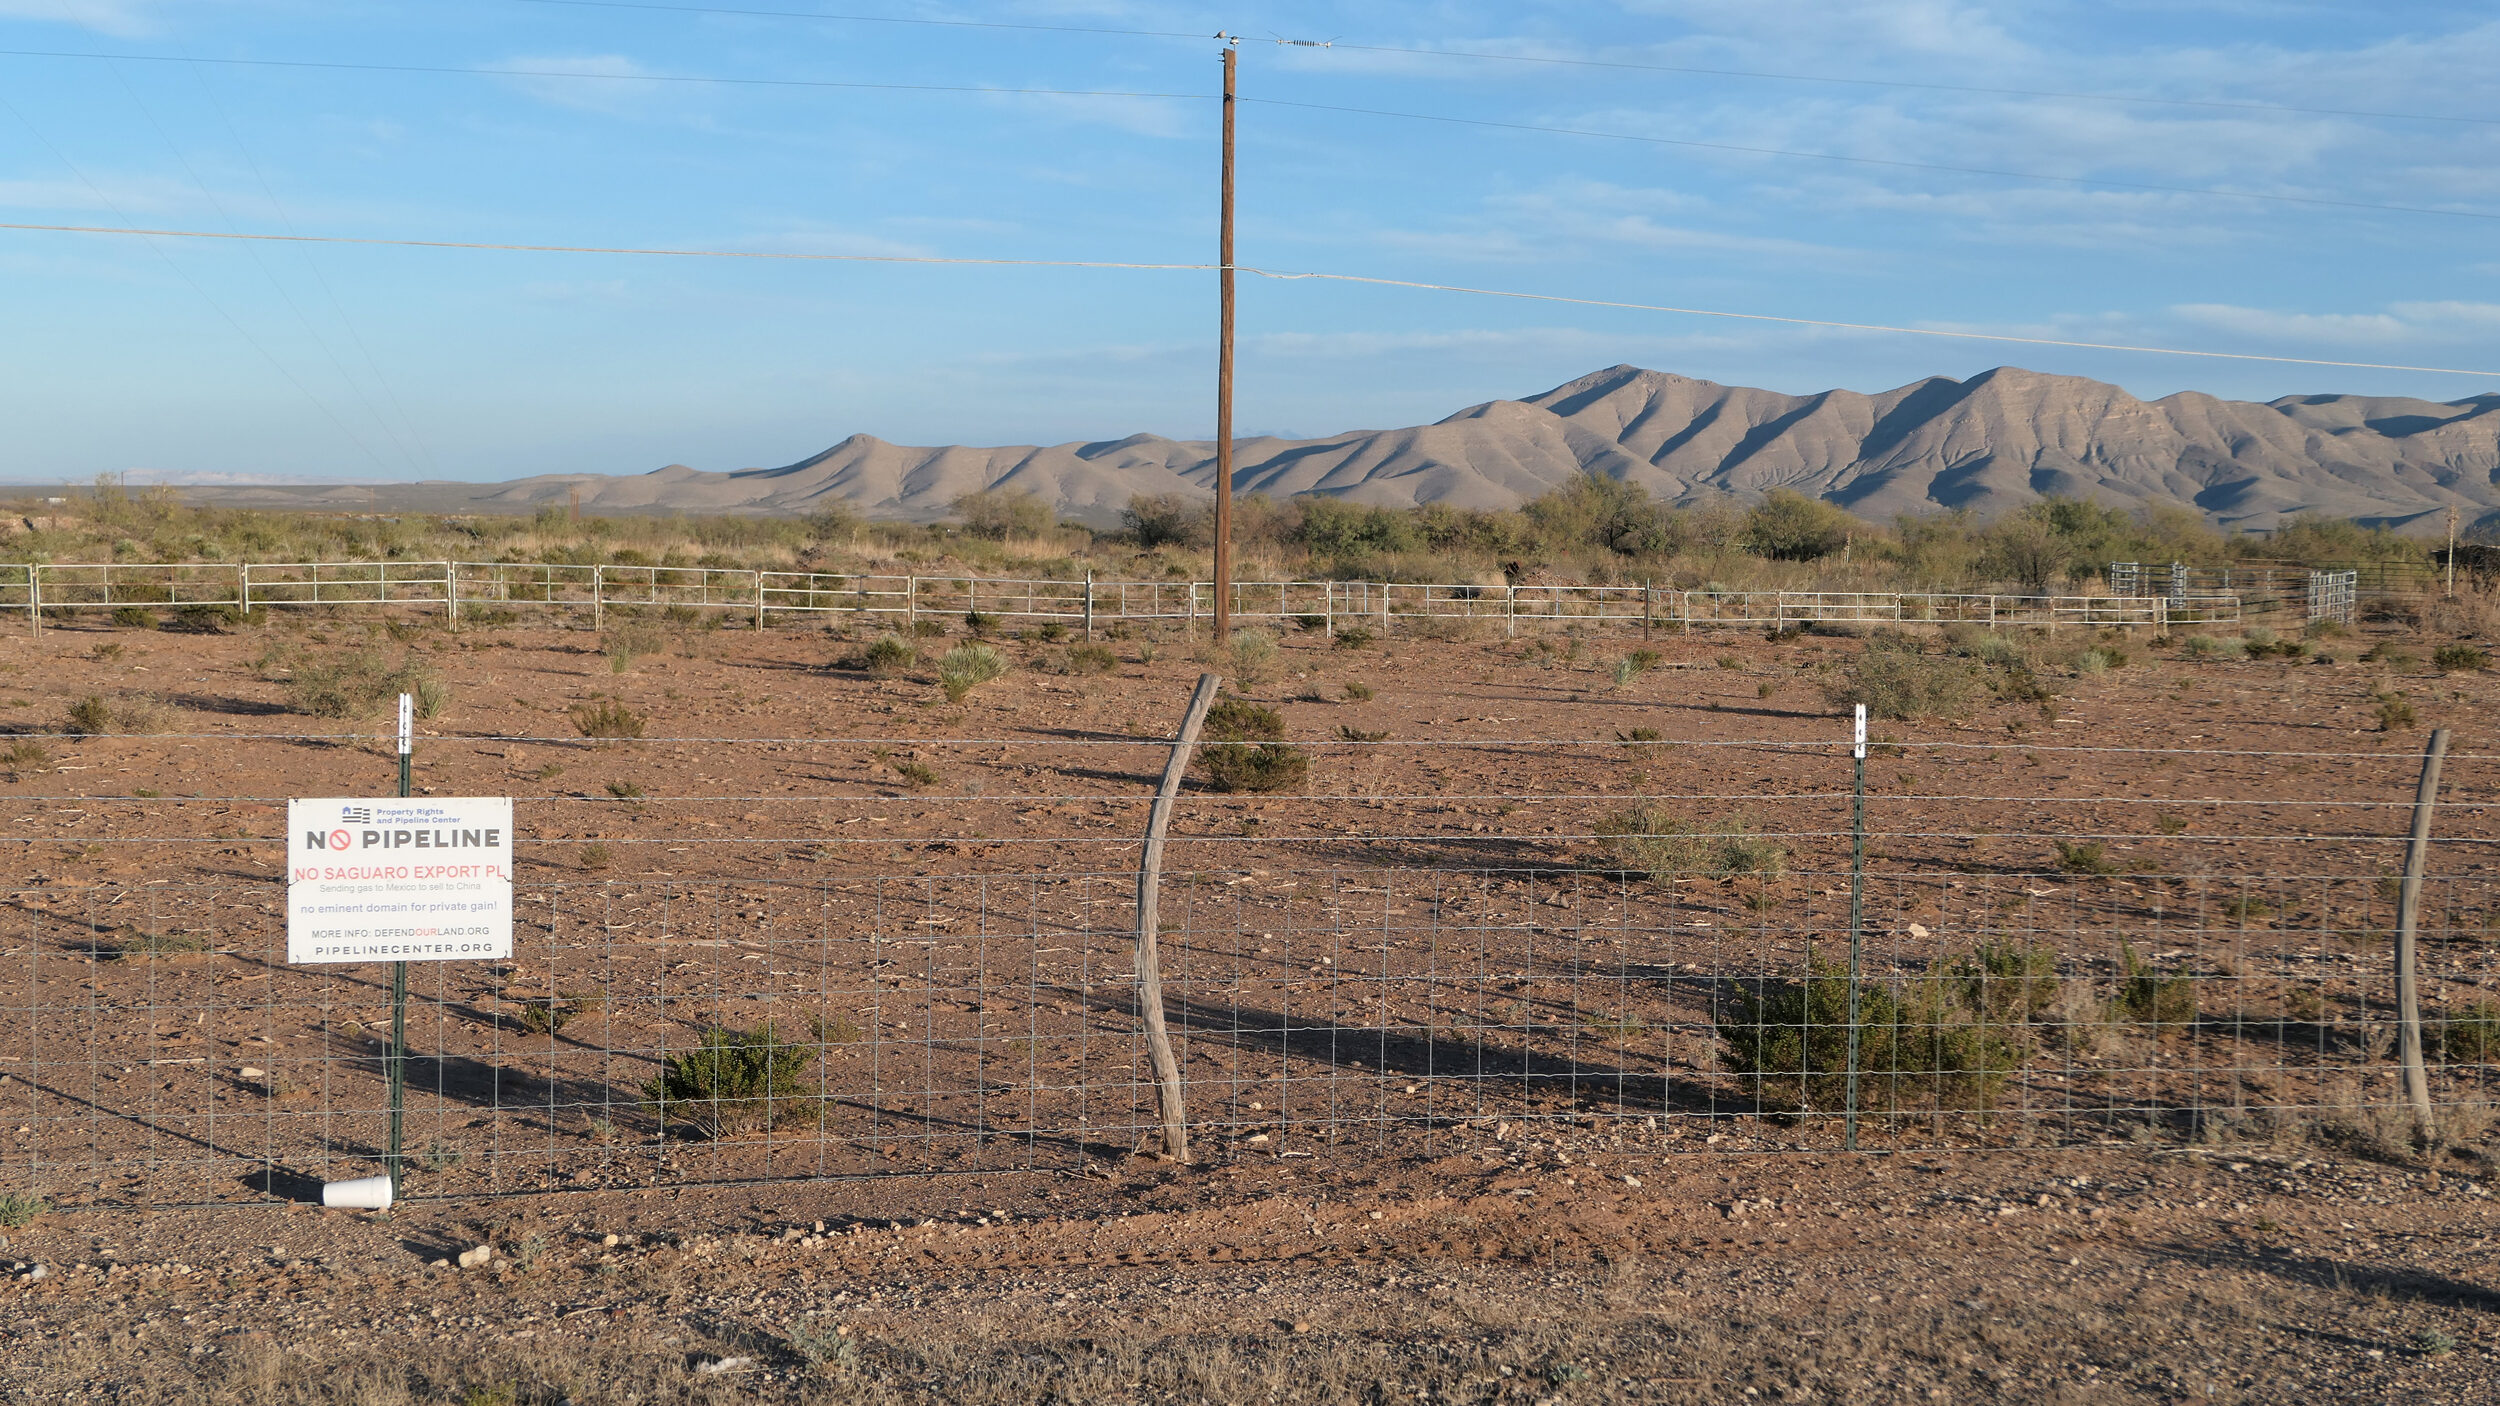 The proposed route of the Saguaro pipeline passes close to this property south of Van Horn. A sign in opposition to the pipeline is attached to the fence. Credit: Martha Pskowski/Inside Climate News